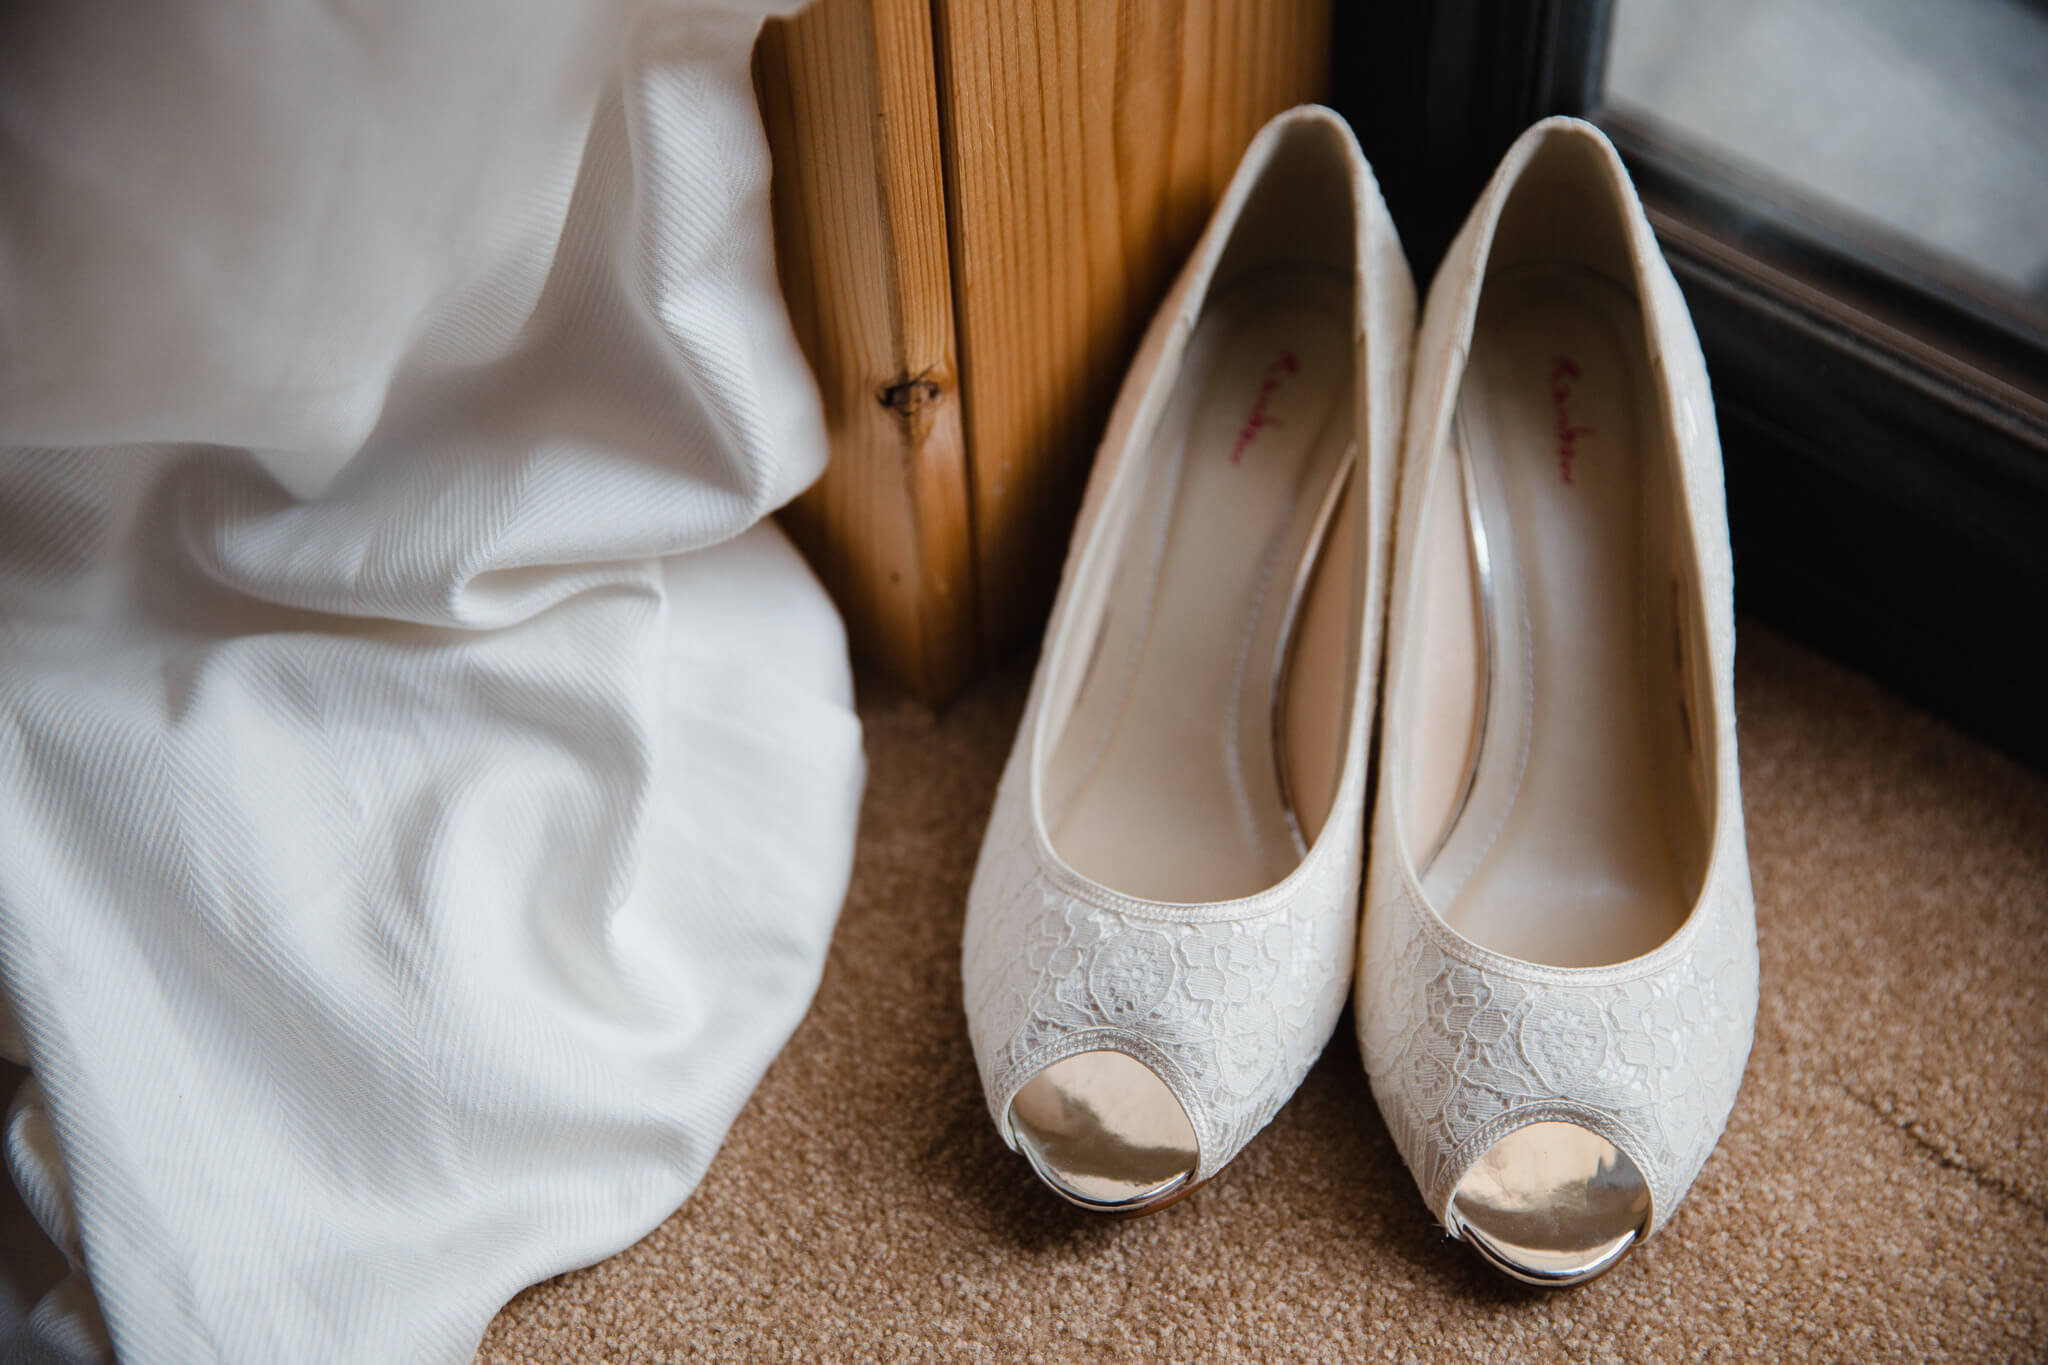 bridal wedding shoes by the window